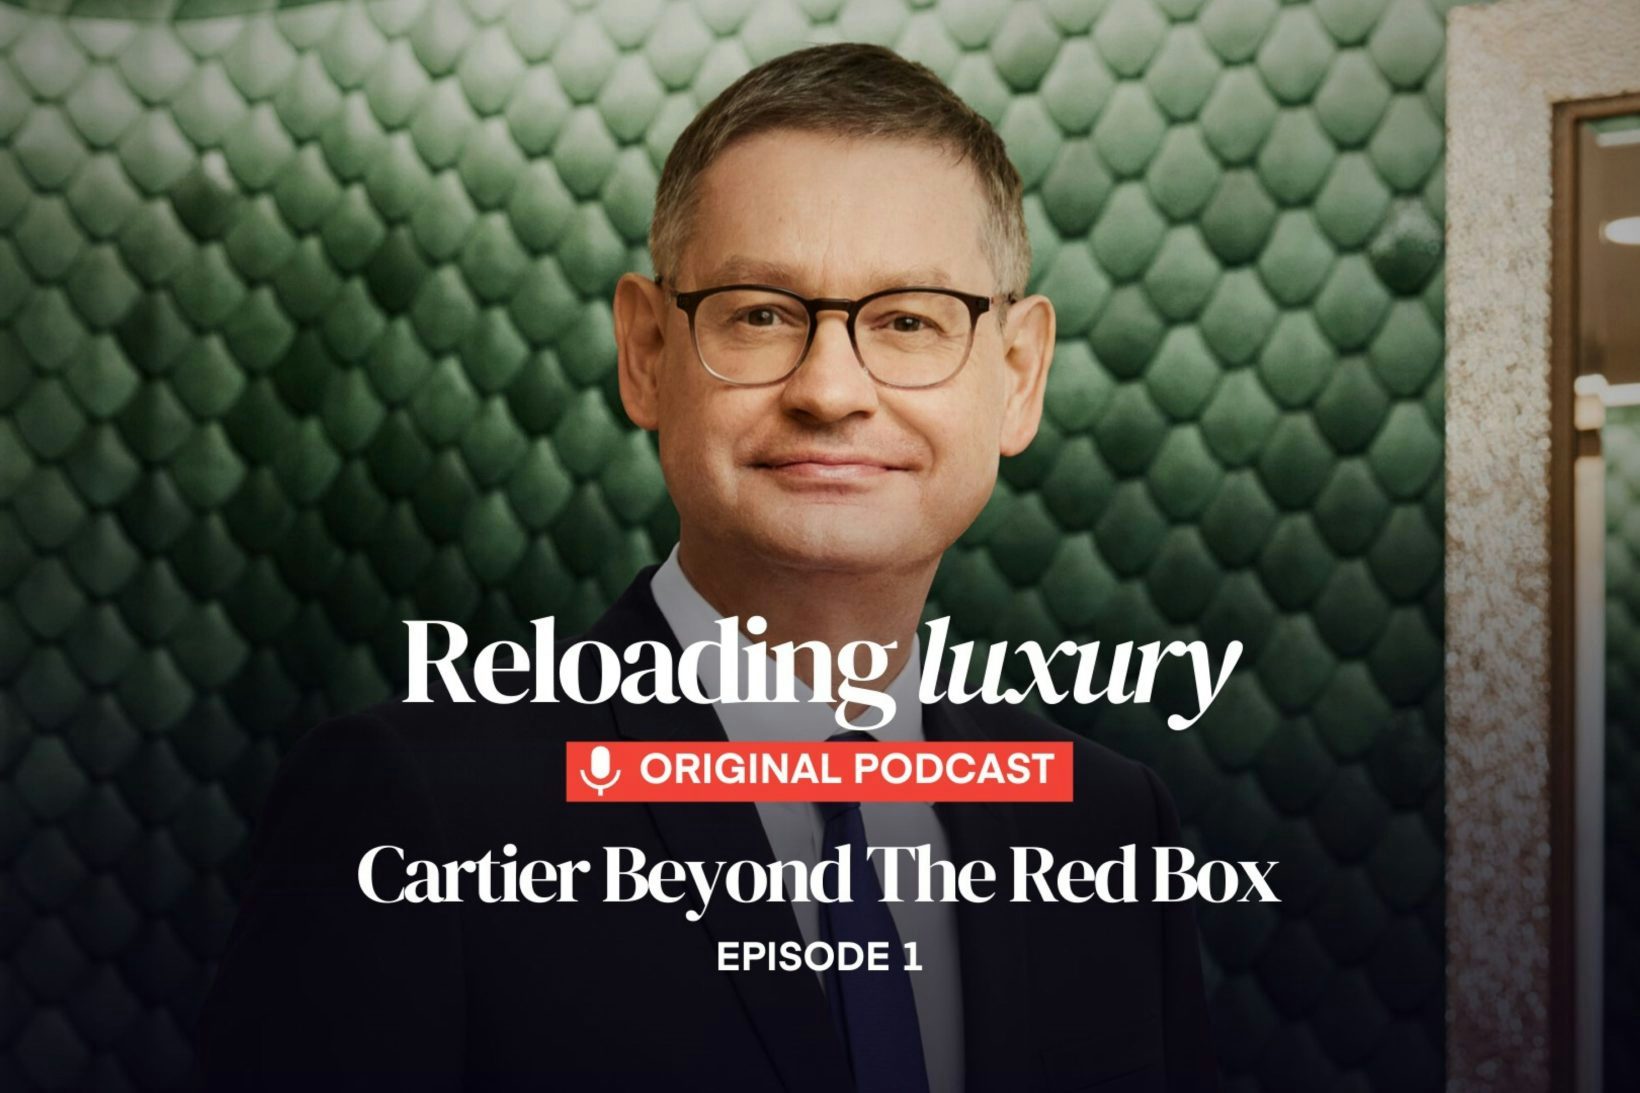 PODCAST. Are commitments a form of cultural diplomacy? Cartier Beyond the Red Box. Episode 1